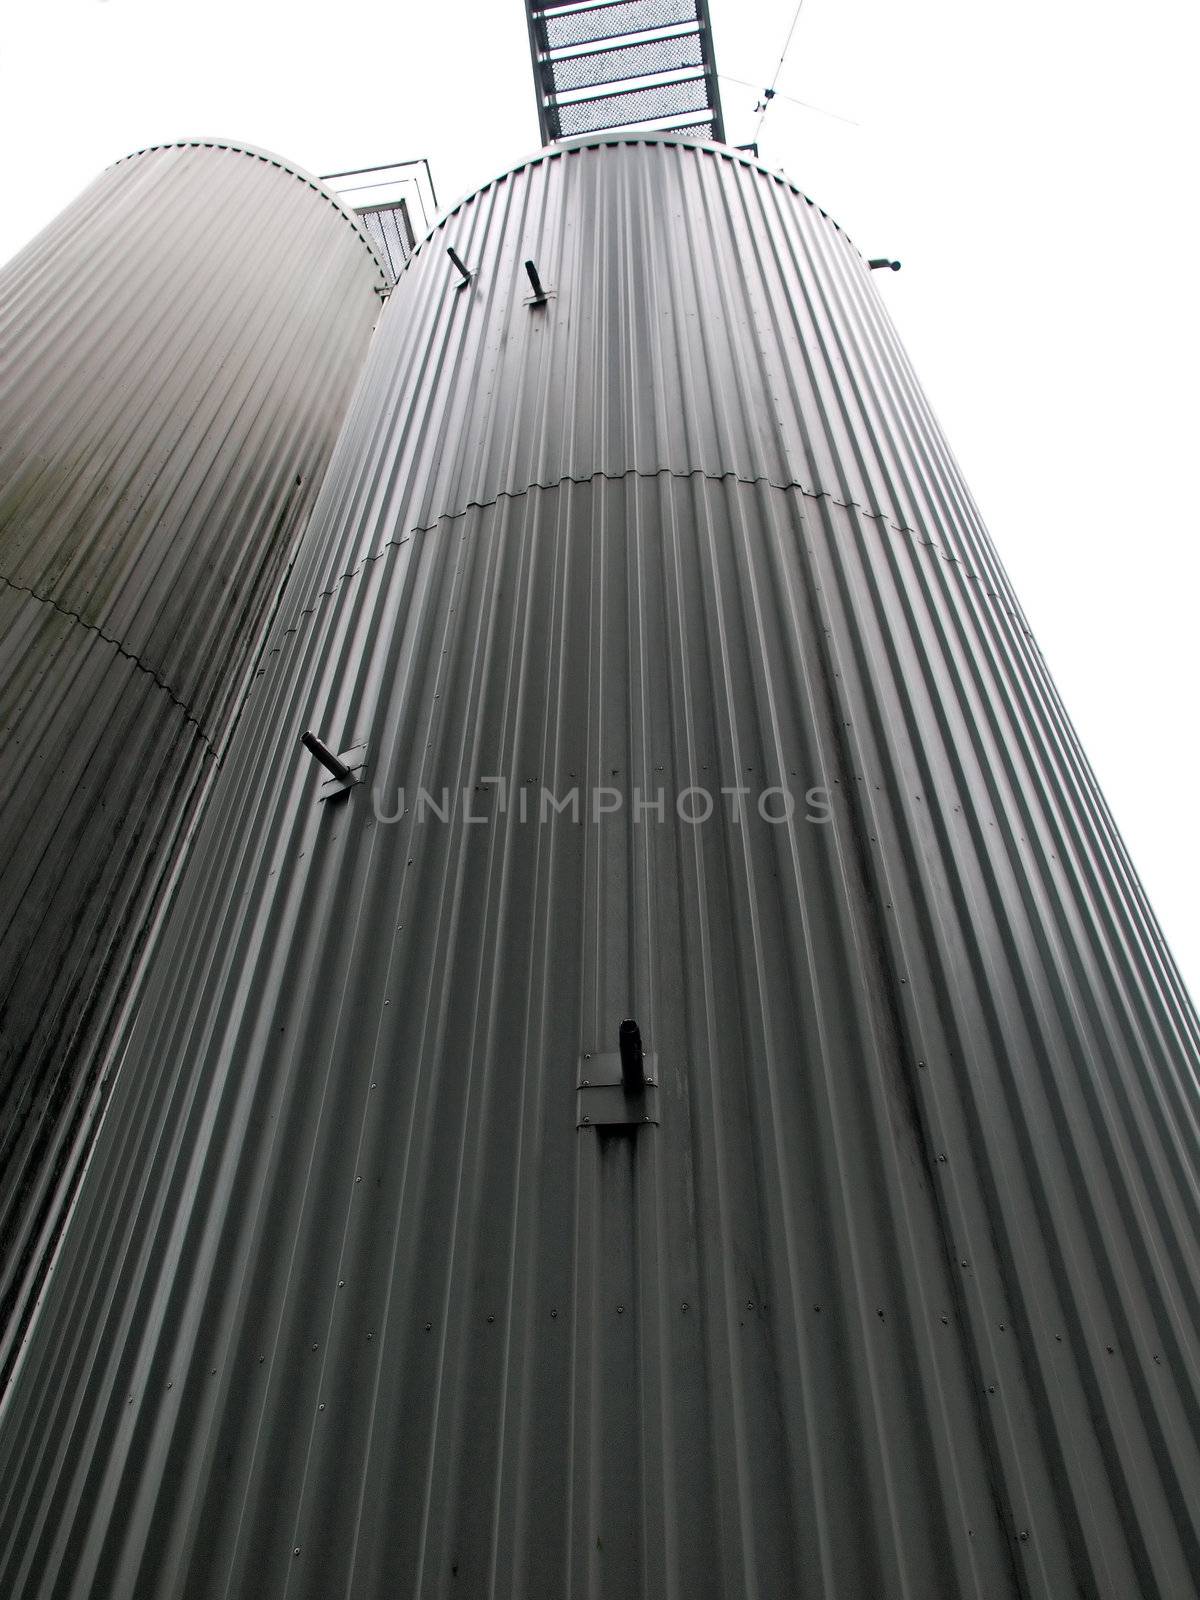 Food industry silo by Ronyzmbow